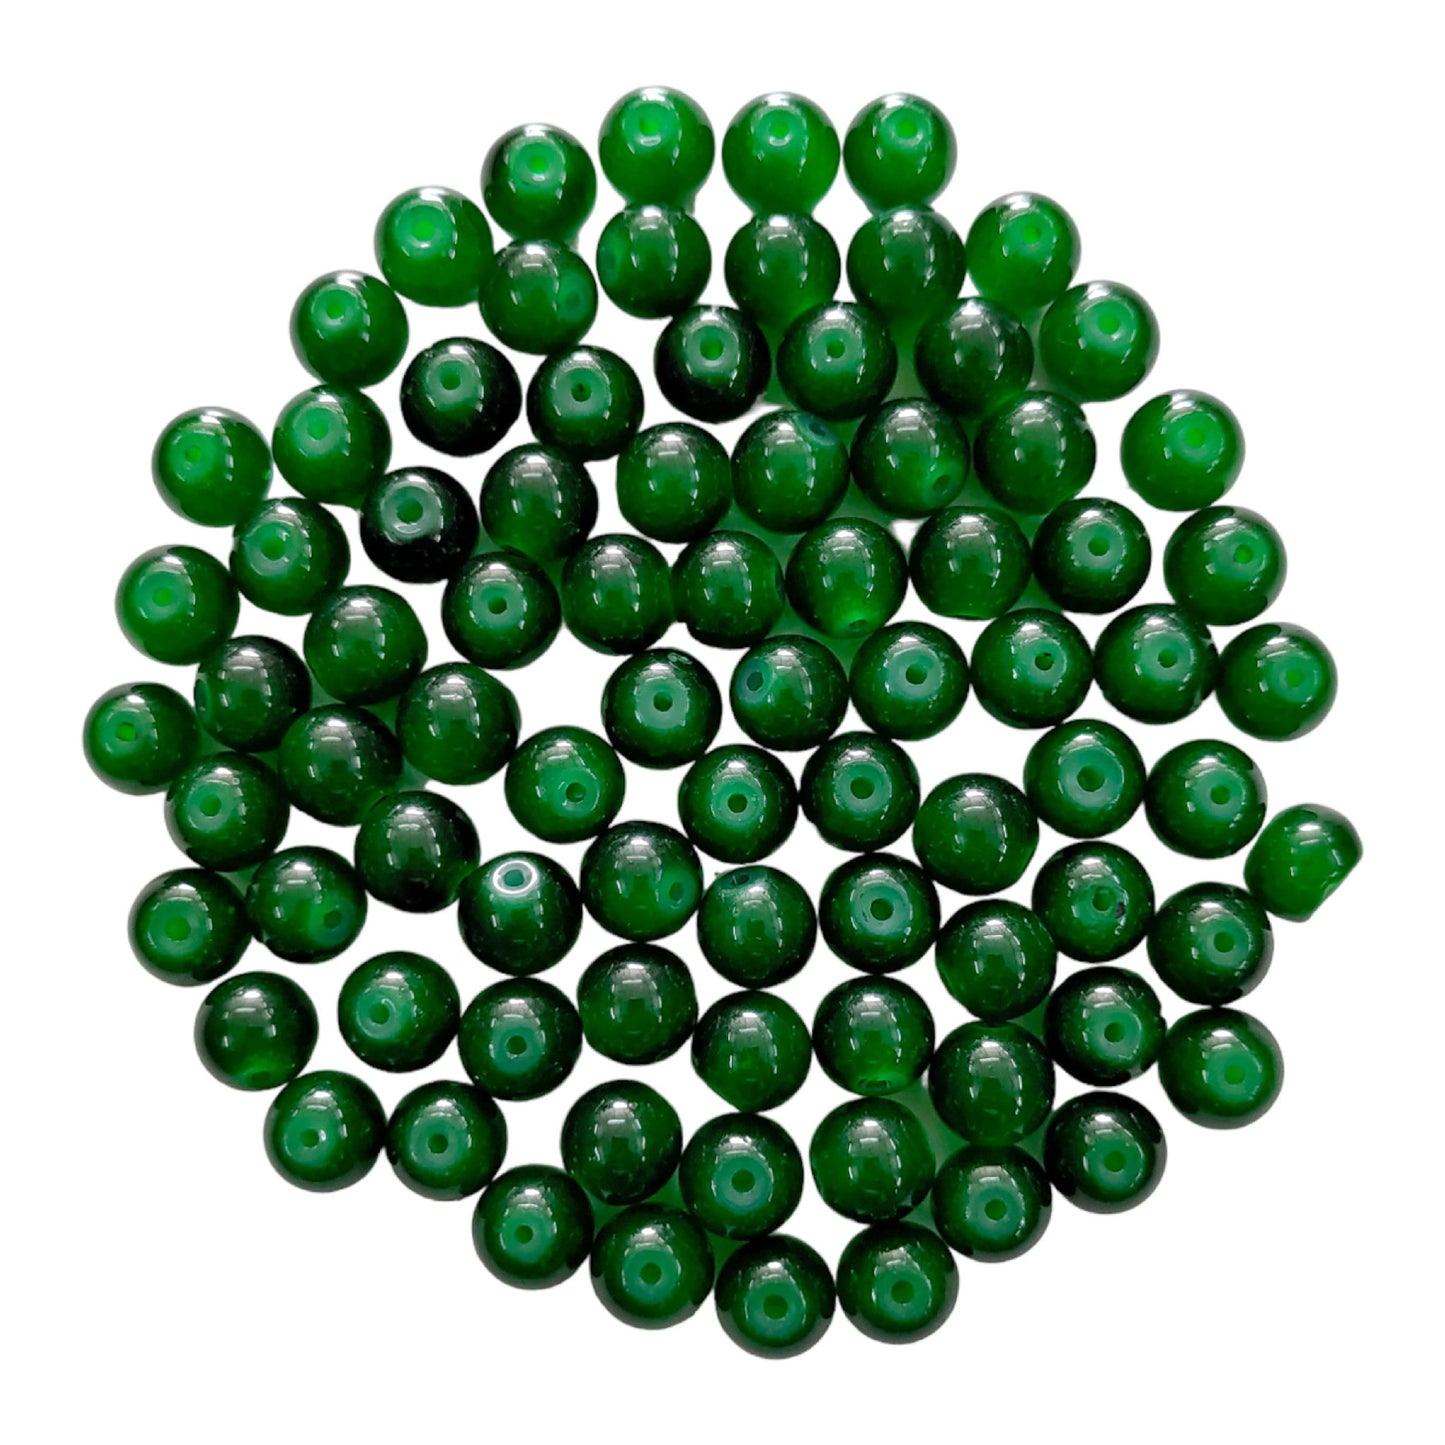 Round Opaque Glass Color Bead For Craft Jewelry Rakhi making or Decoration -11725 (10 mm)